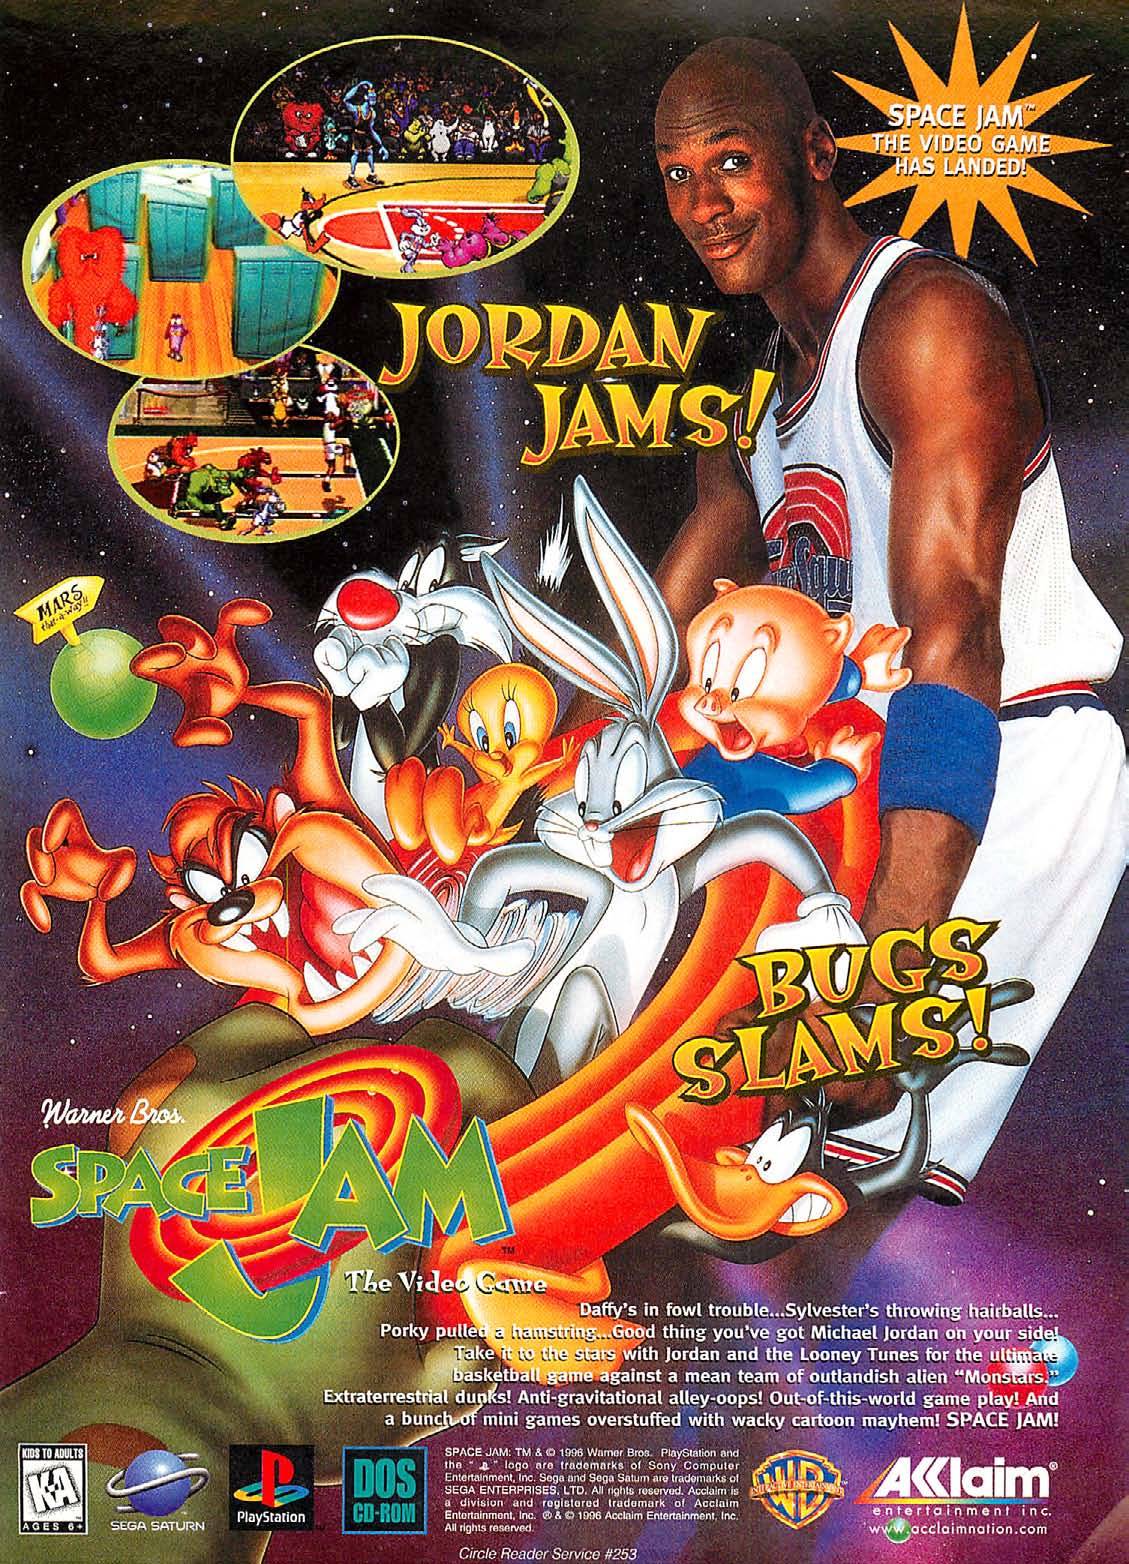 “Space Jam”
• Computer Gaming World, December 1996 (#149)
• Scanned by CGW Museum
• Come on and SLAM! And welcome to the JAM!